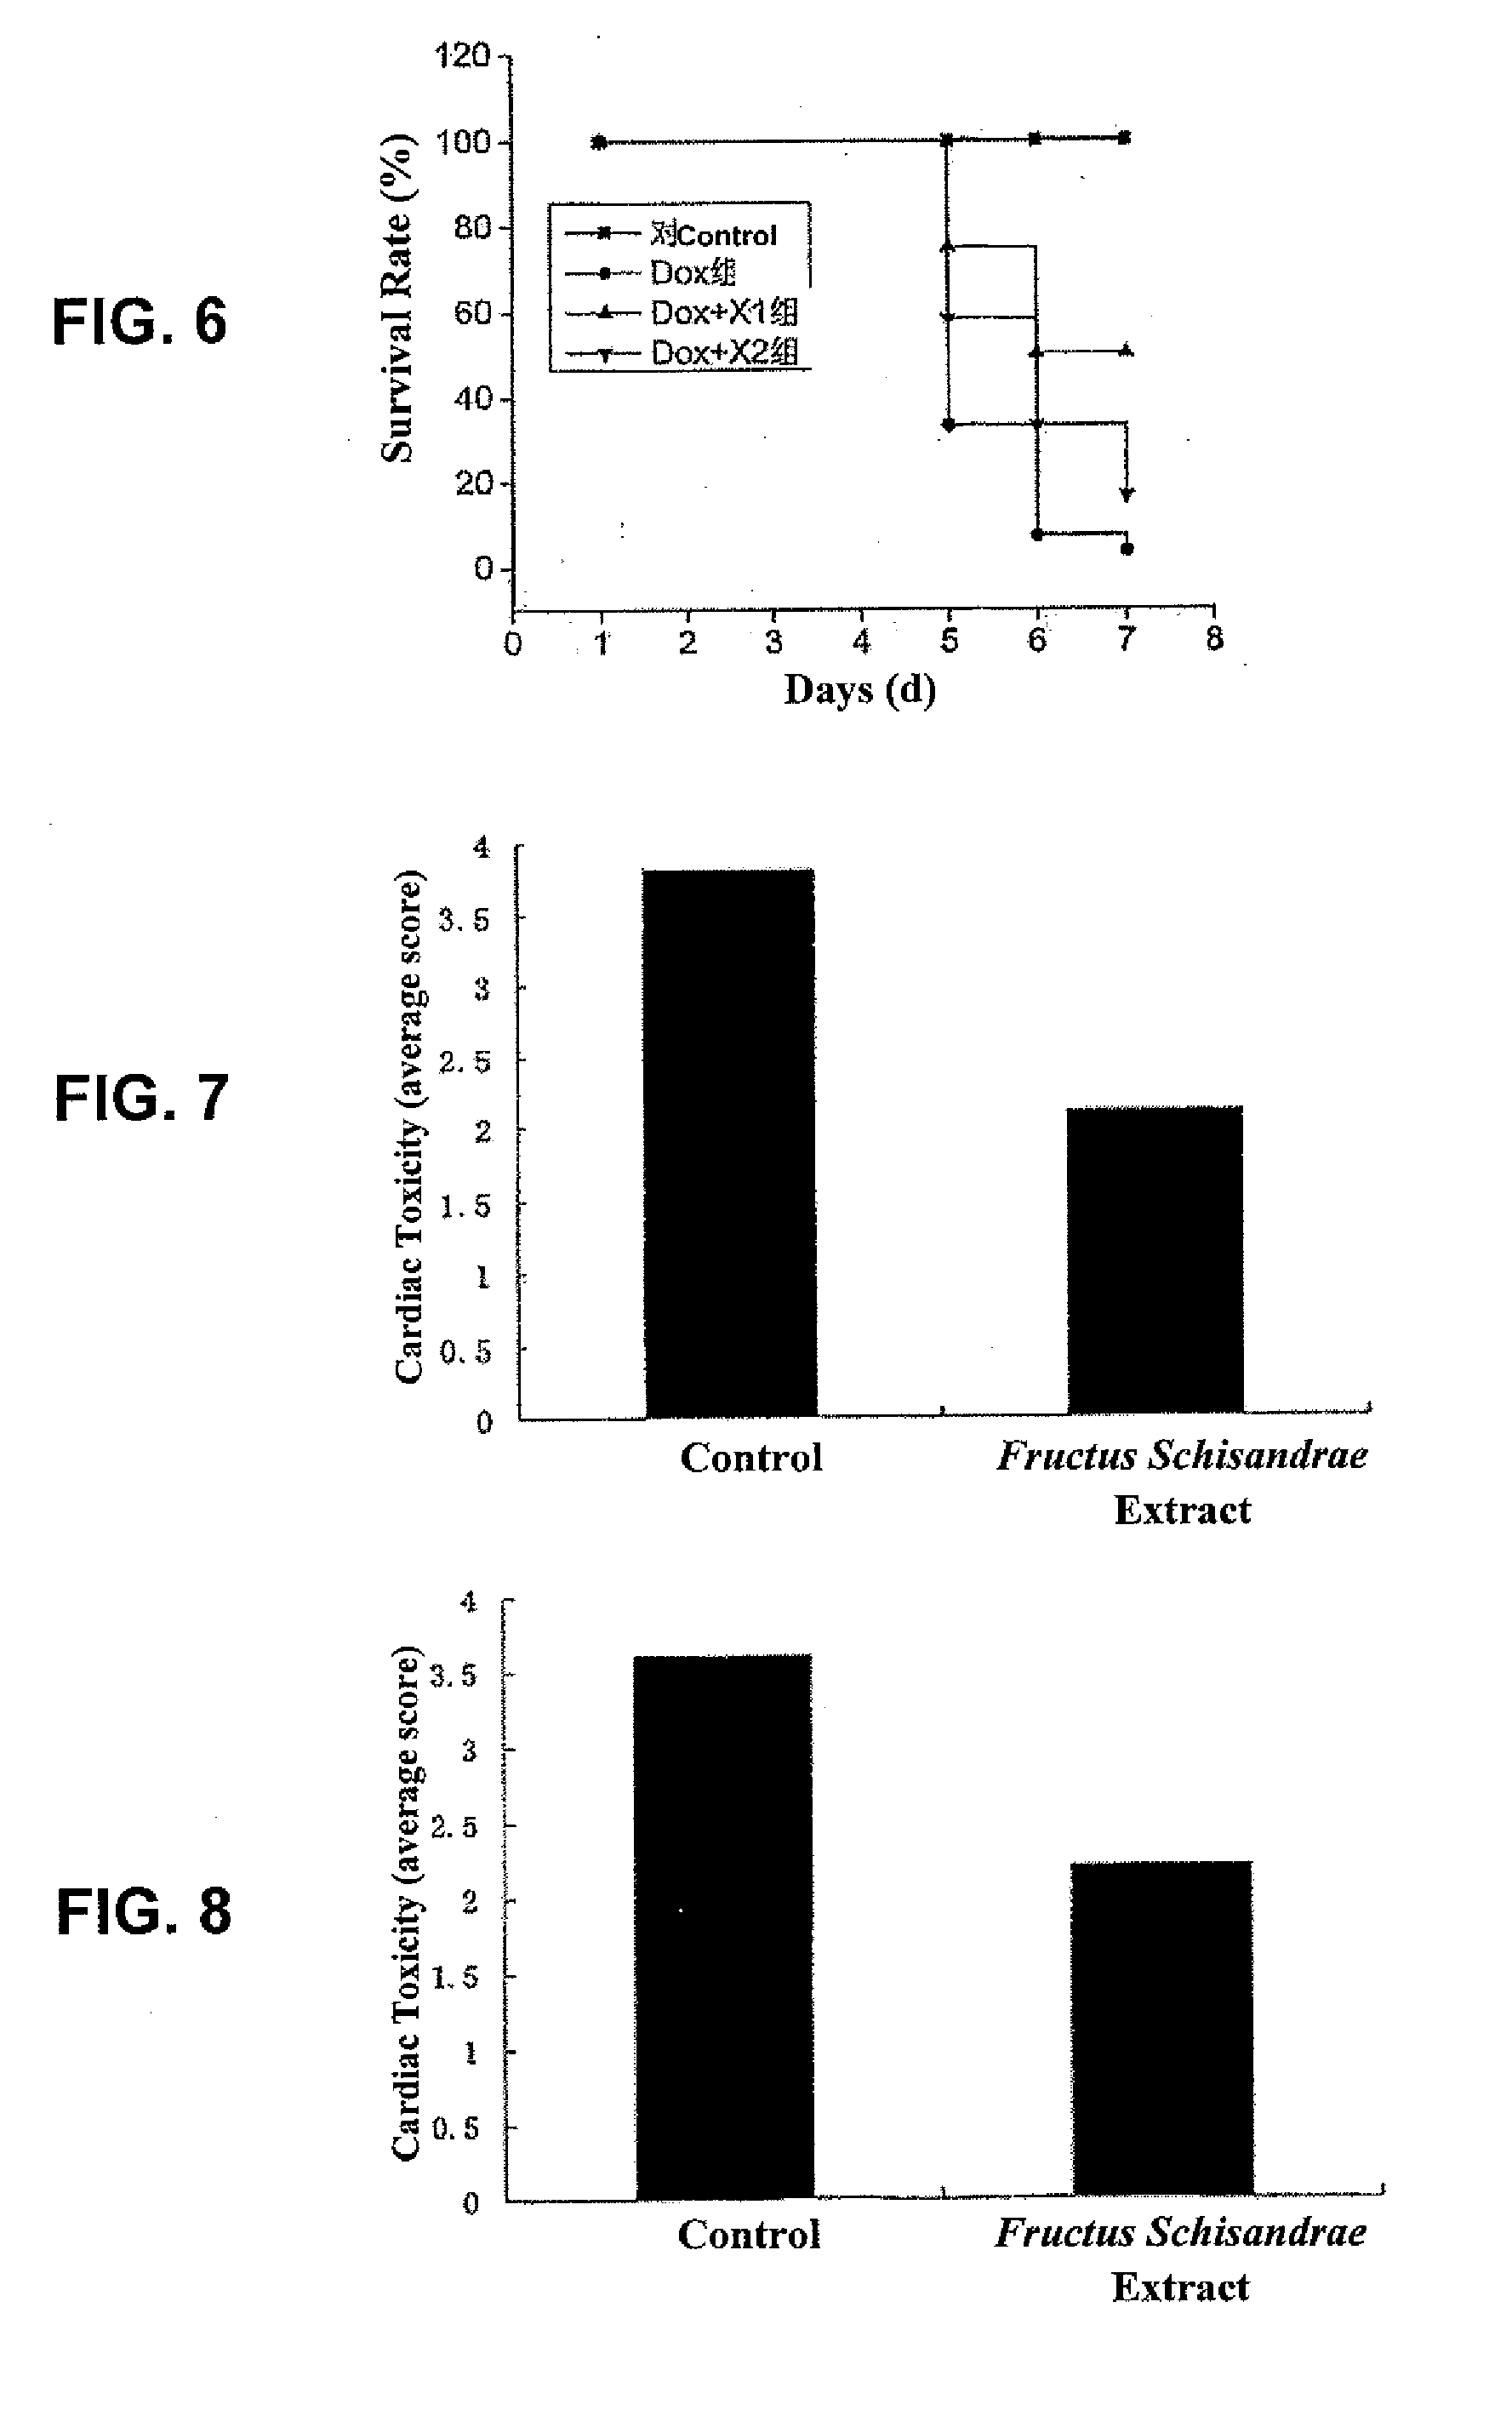 Use of fructus schisandrae and extracts thereof in preventing and decreasing toxic and side effects of antineoplastic drugs